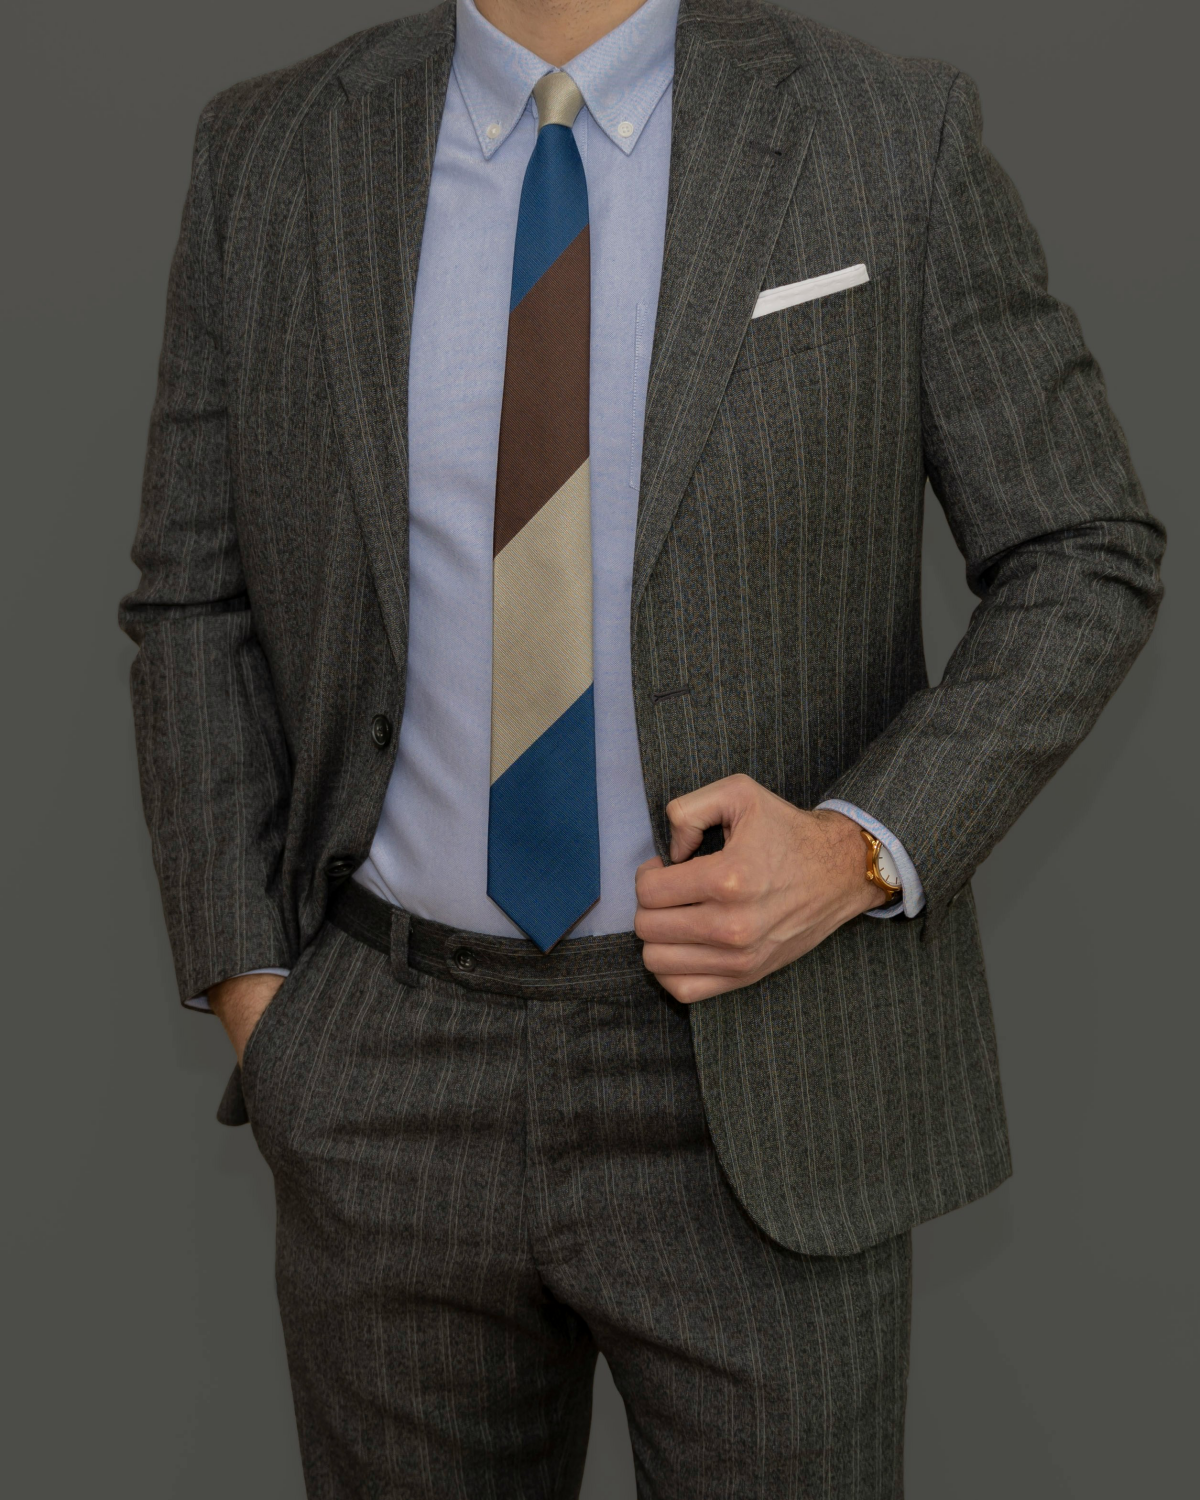 man wearing a gray suit